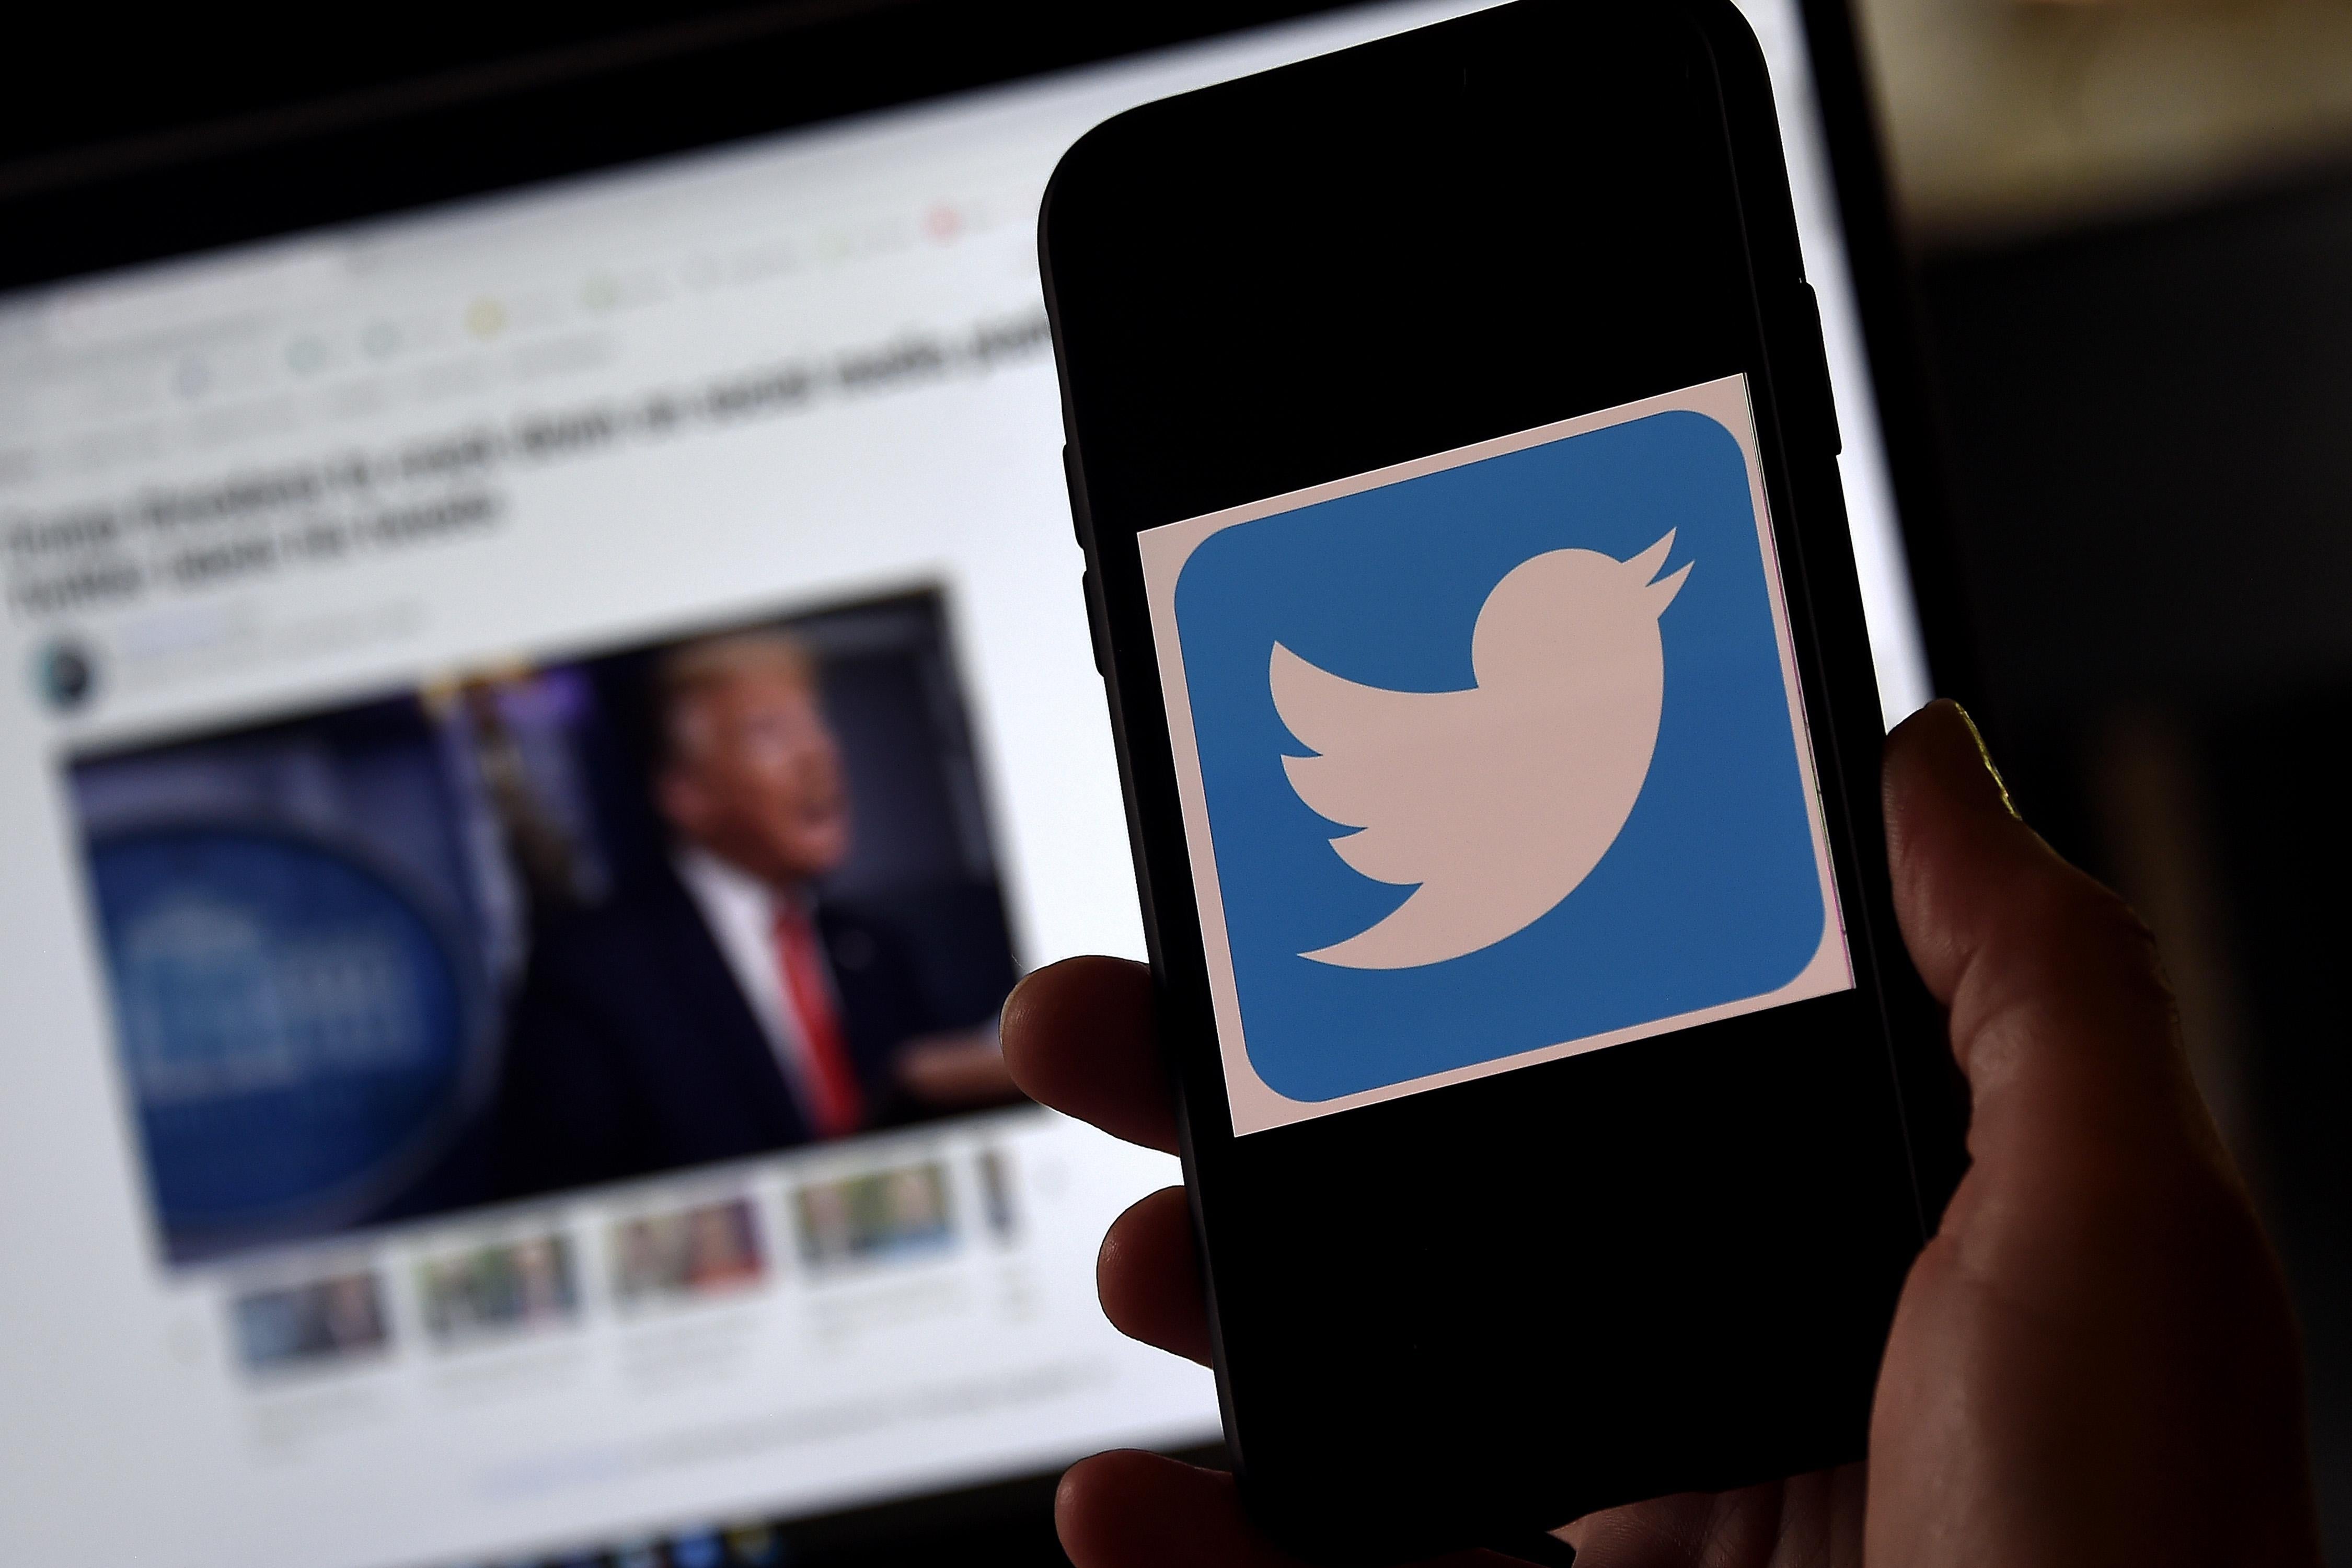 A Twitter logo is displayed on a mobile phone with Donald Trump's Twitter page shown in the background on a desktop screen.